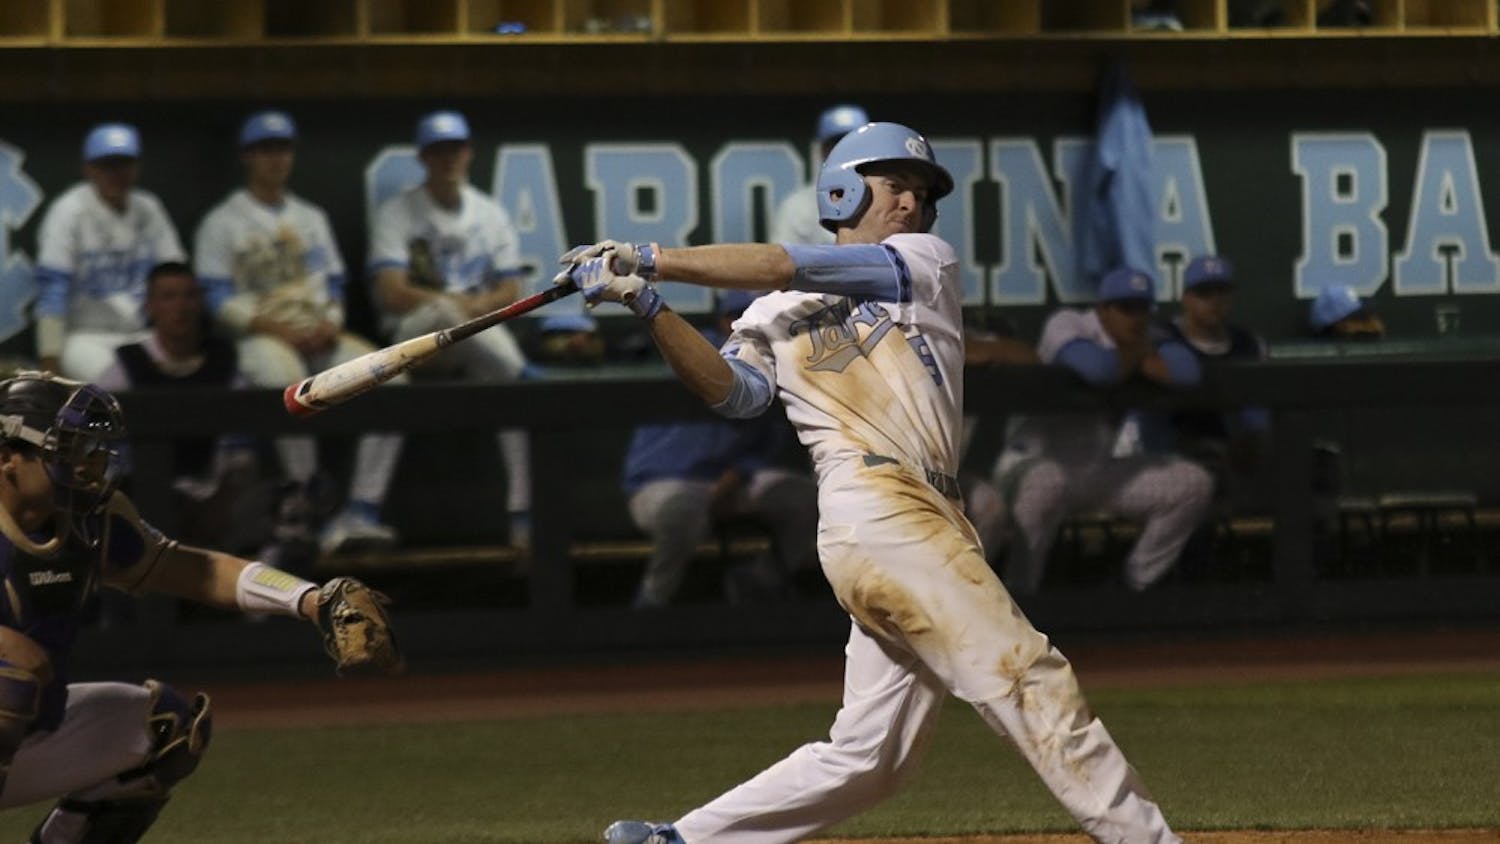 First baseman Ryan Miller (5) follow through on  swing in the bottom of the seventh inning during the North Carolina baseball team's 10-2 route of Western Carolina University on Tuesday.